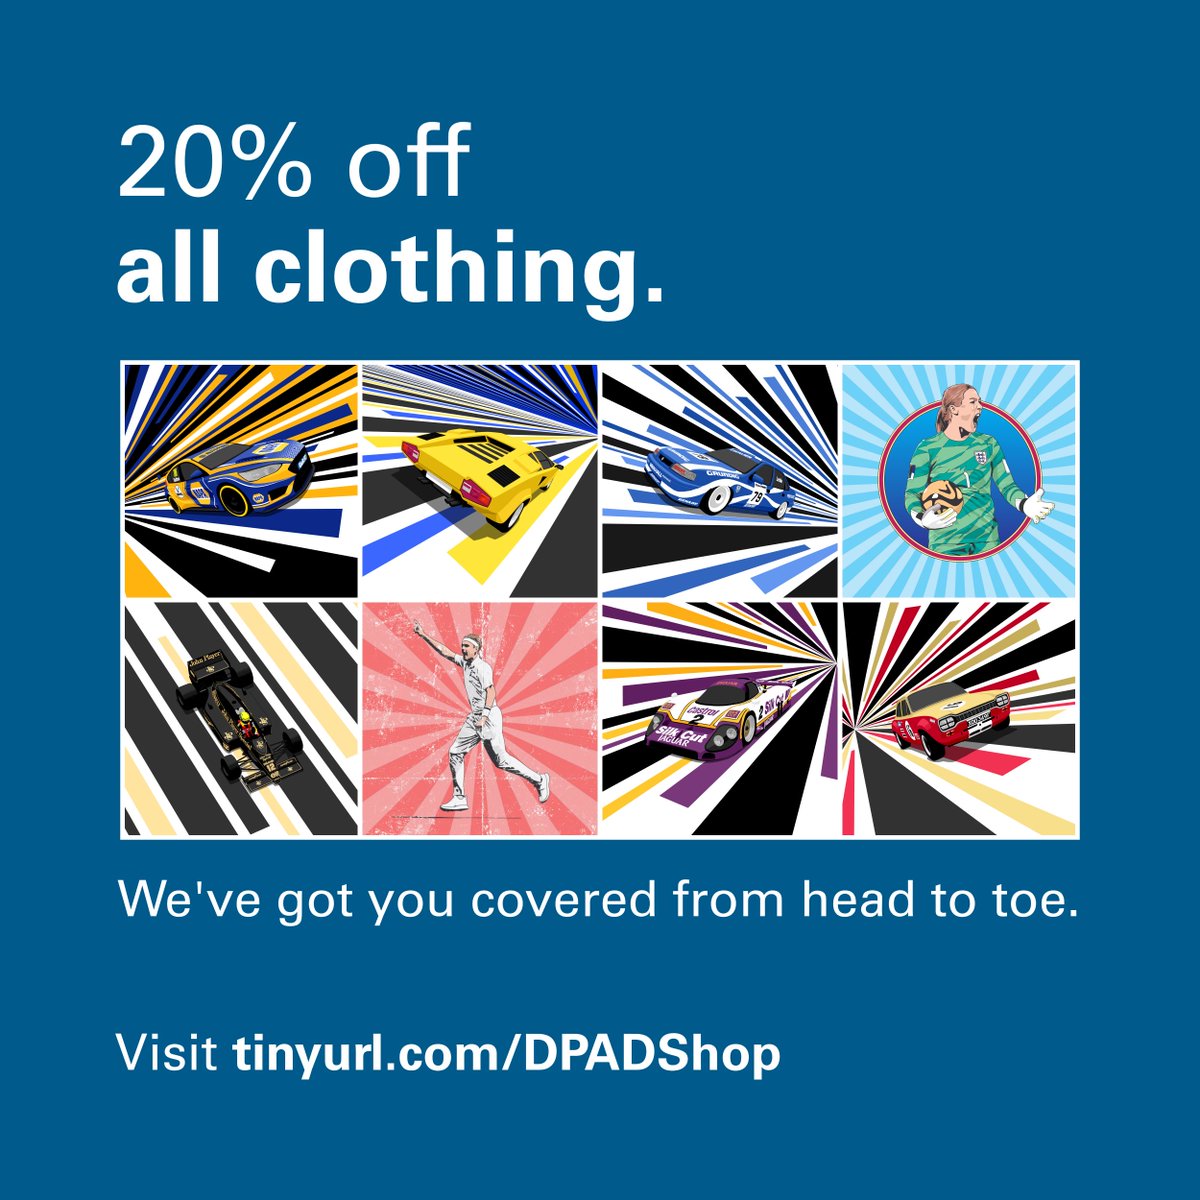 Like clothes? Like art? Like bargains? Well, why not have a look in the DPA Design shop, where there's currently 20% off all T-shirts, hoodies and other apparel? Browse all designs here: tinyurl.com/DPADShop